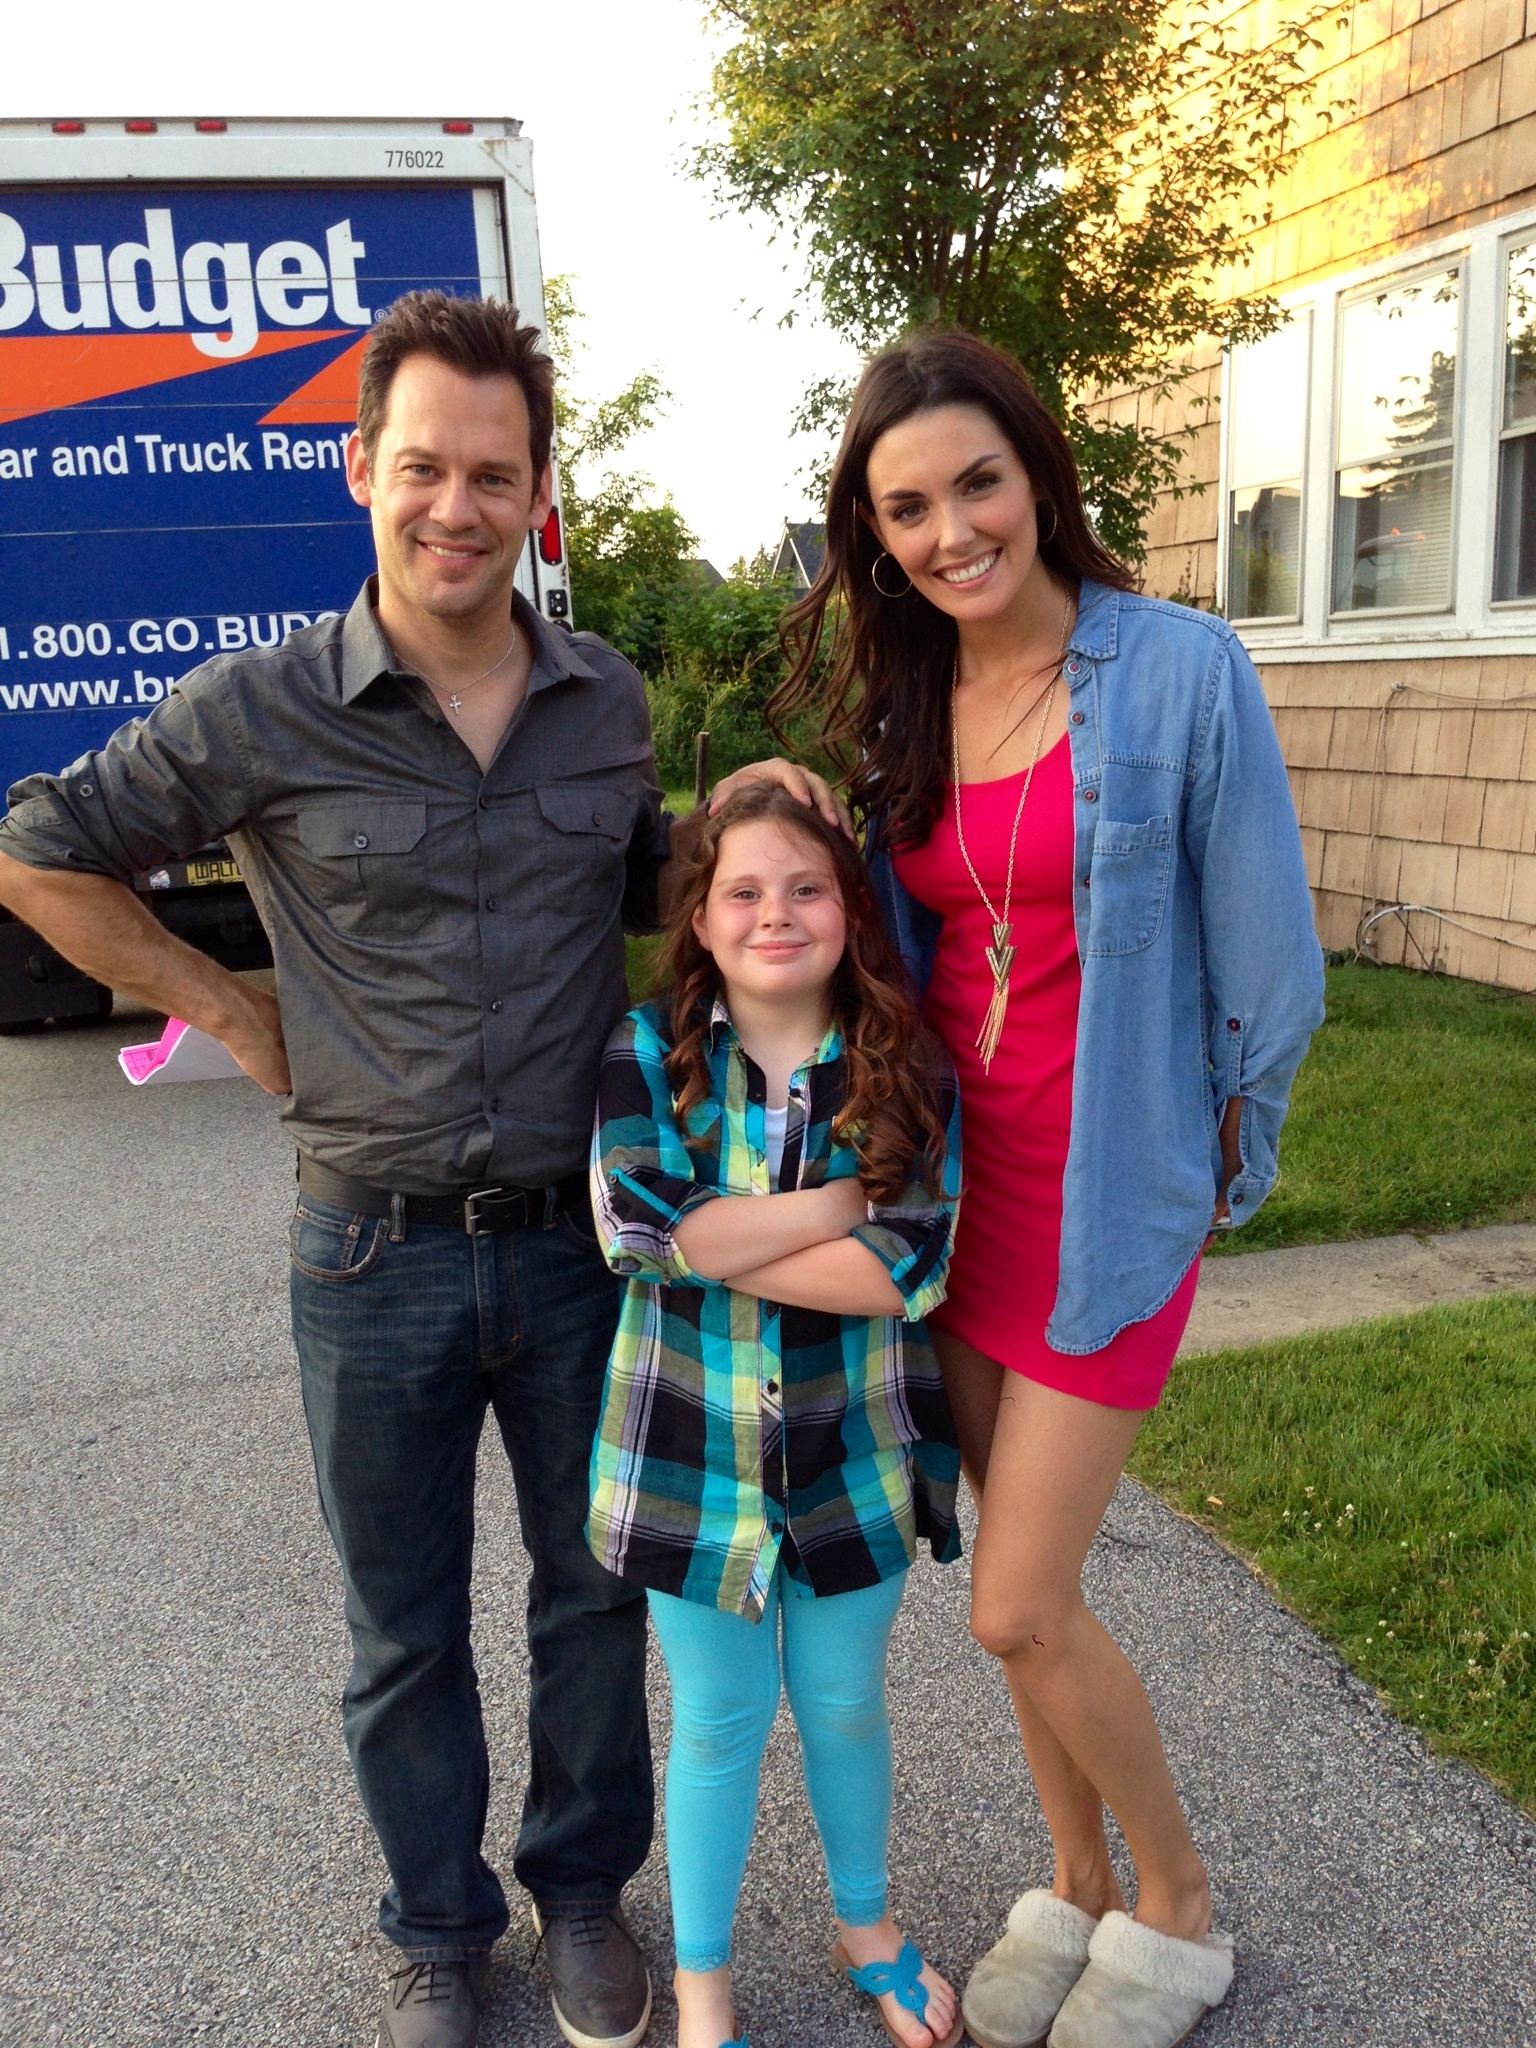 Katie with her Sins of the Preacher co -stars Chris Gartin and Taylor Cole.